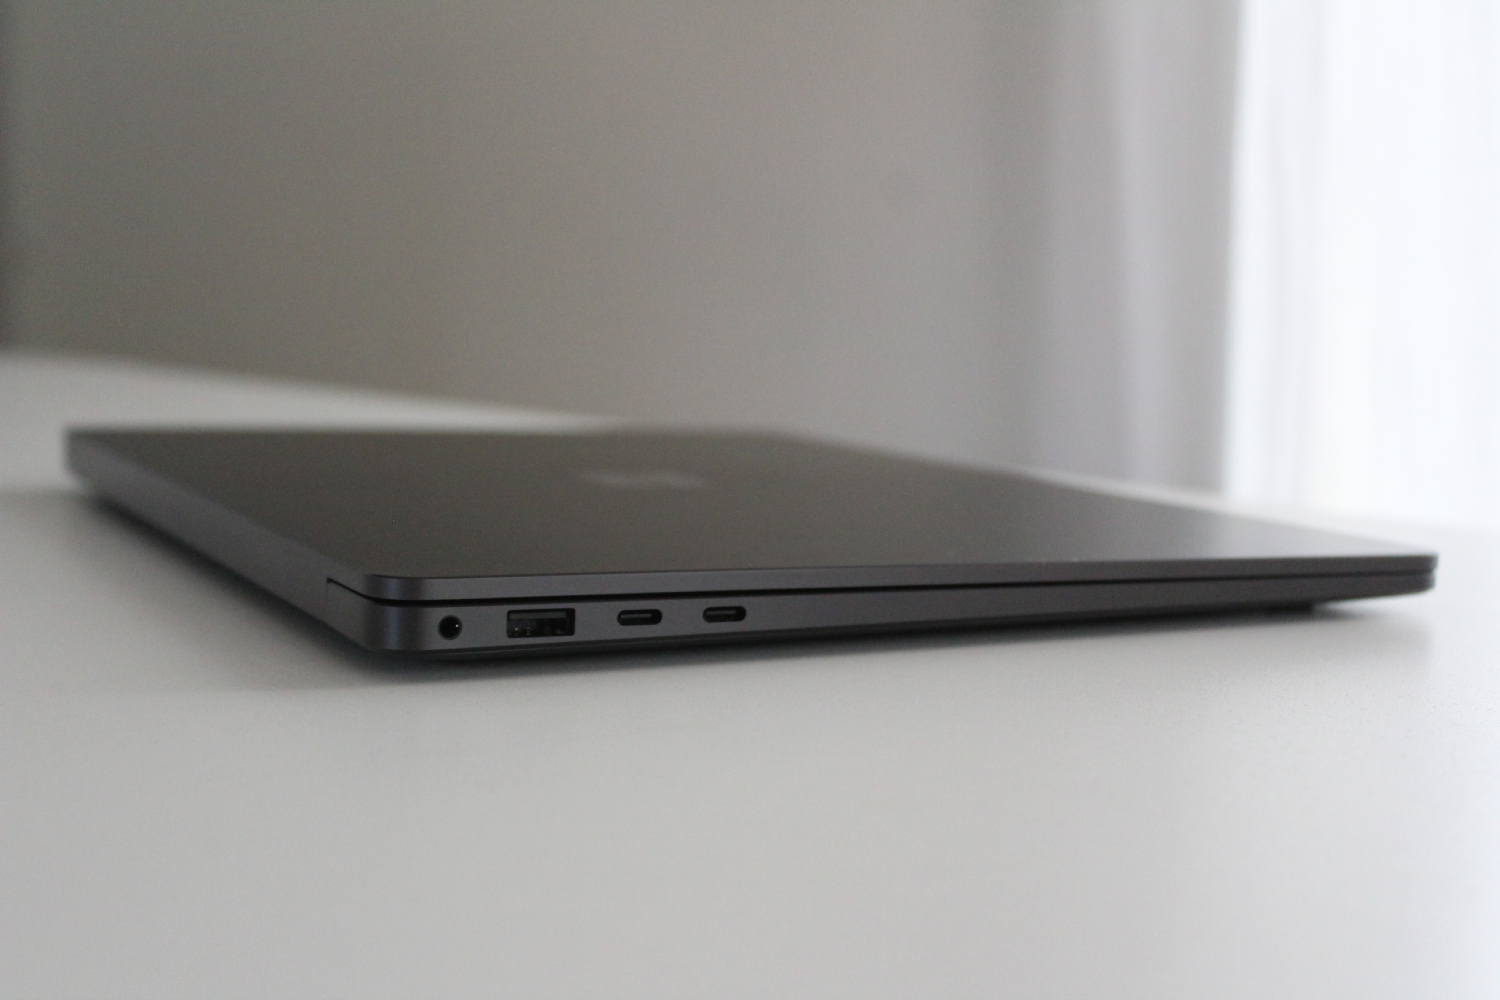 The ports shown on the Surface Laptop 7.